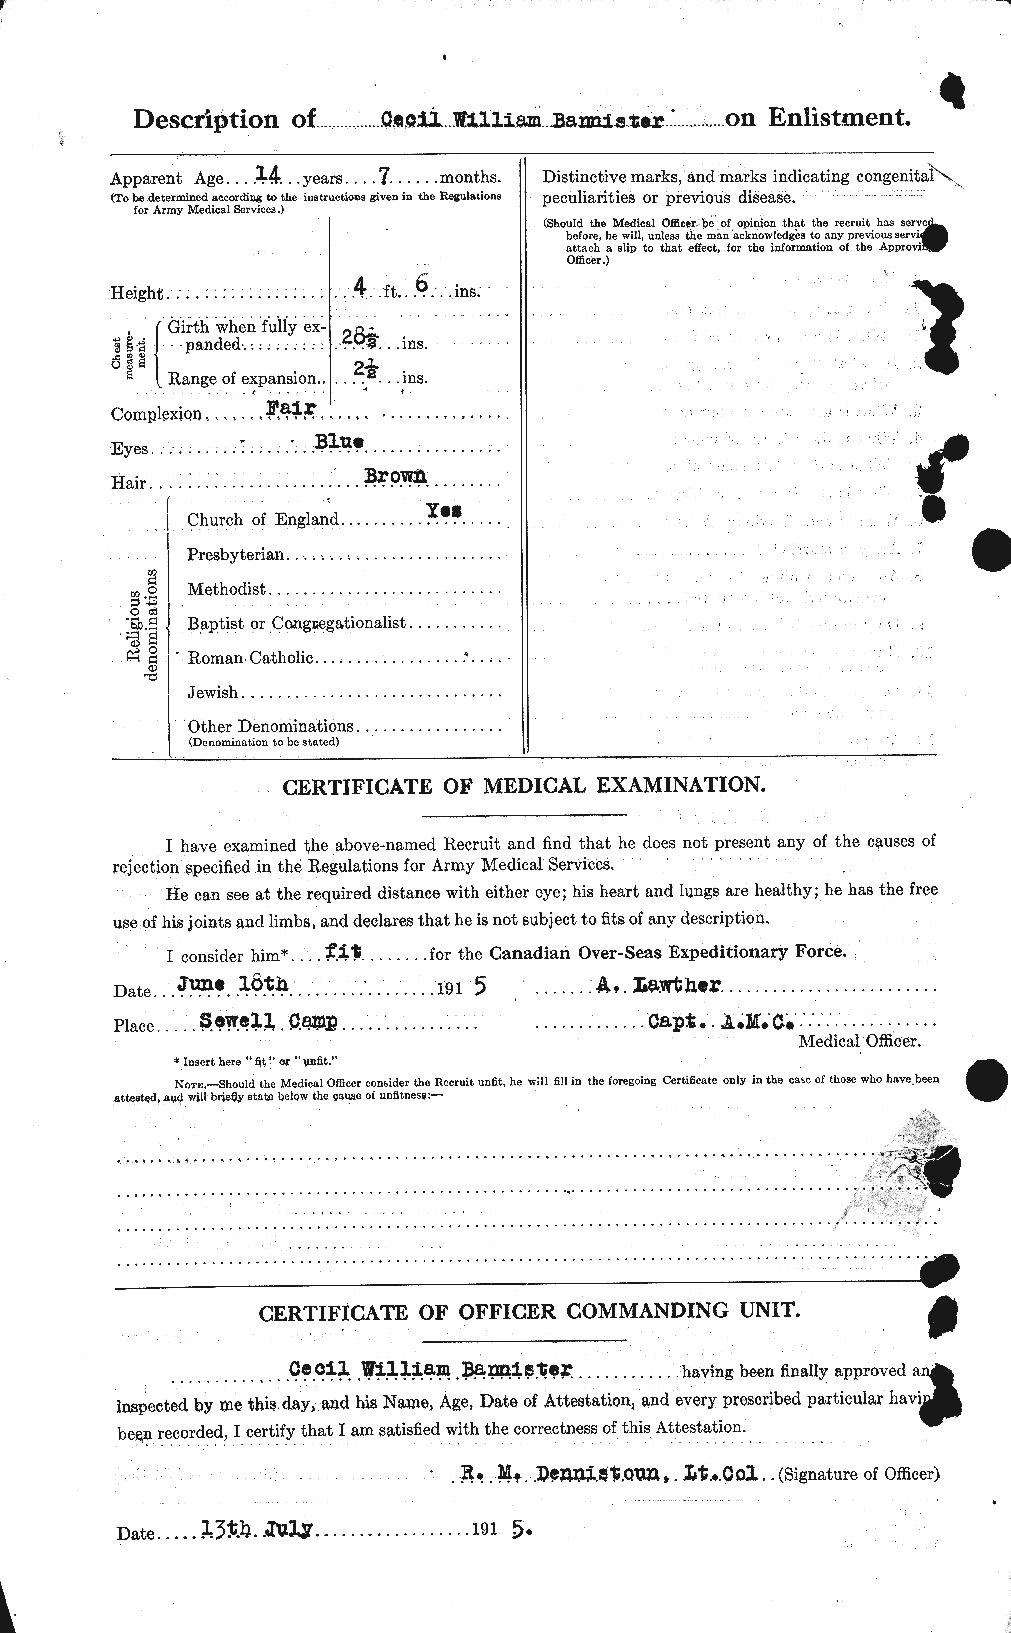 Personnel Records of the First World War - CEF 224810b